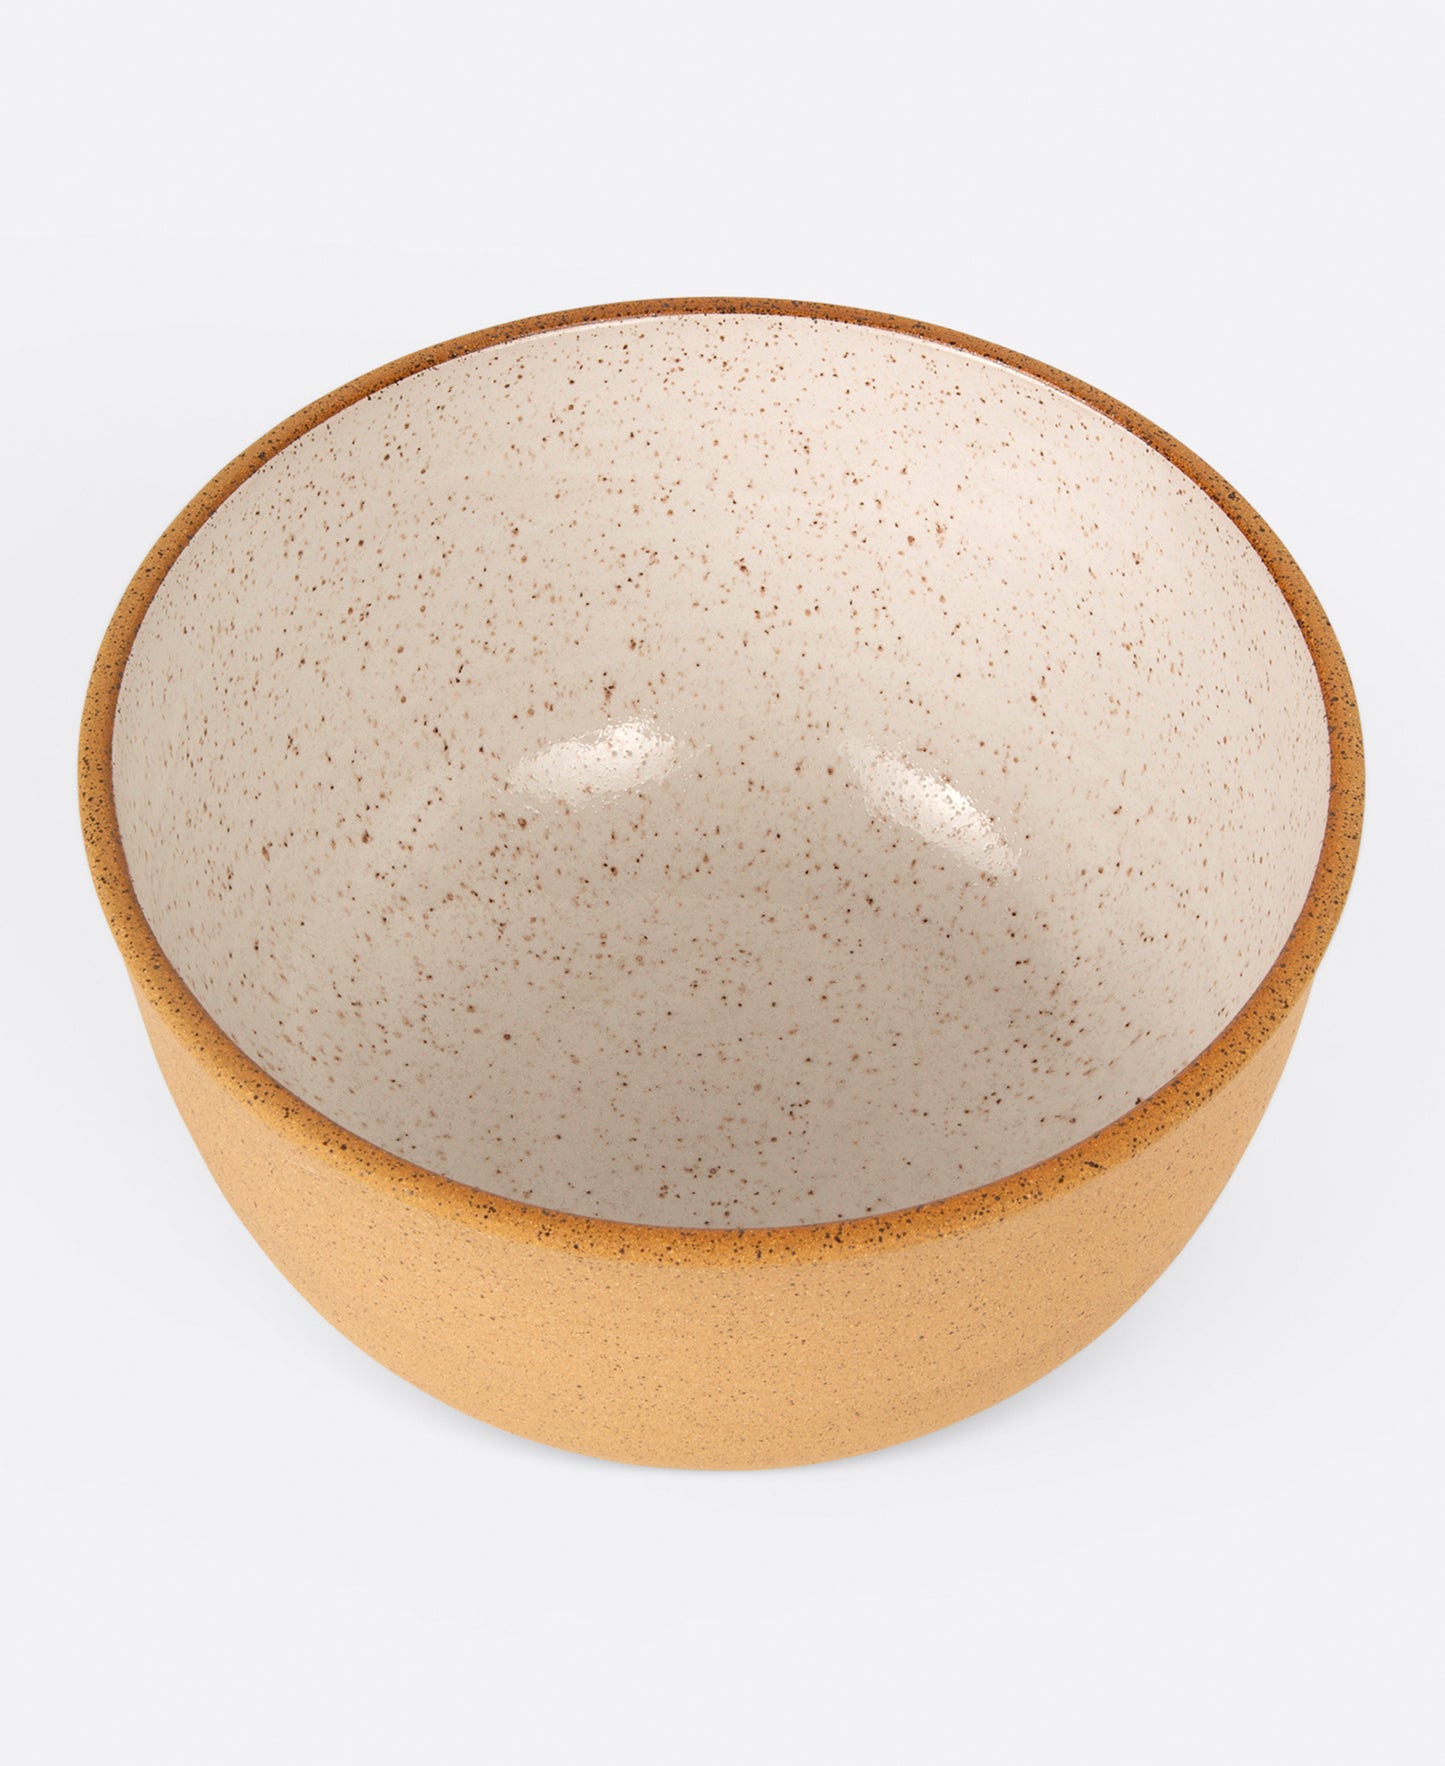 A stoneware salad bowl with a raw exterior and white glazed interior, shown from above.